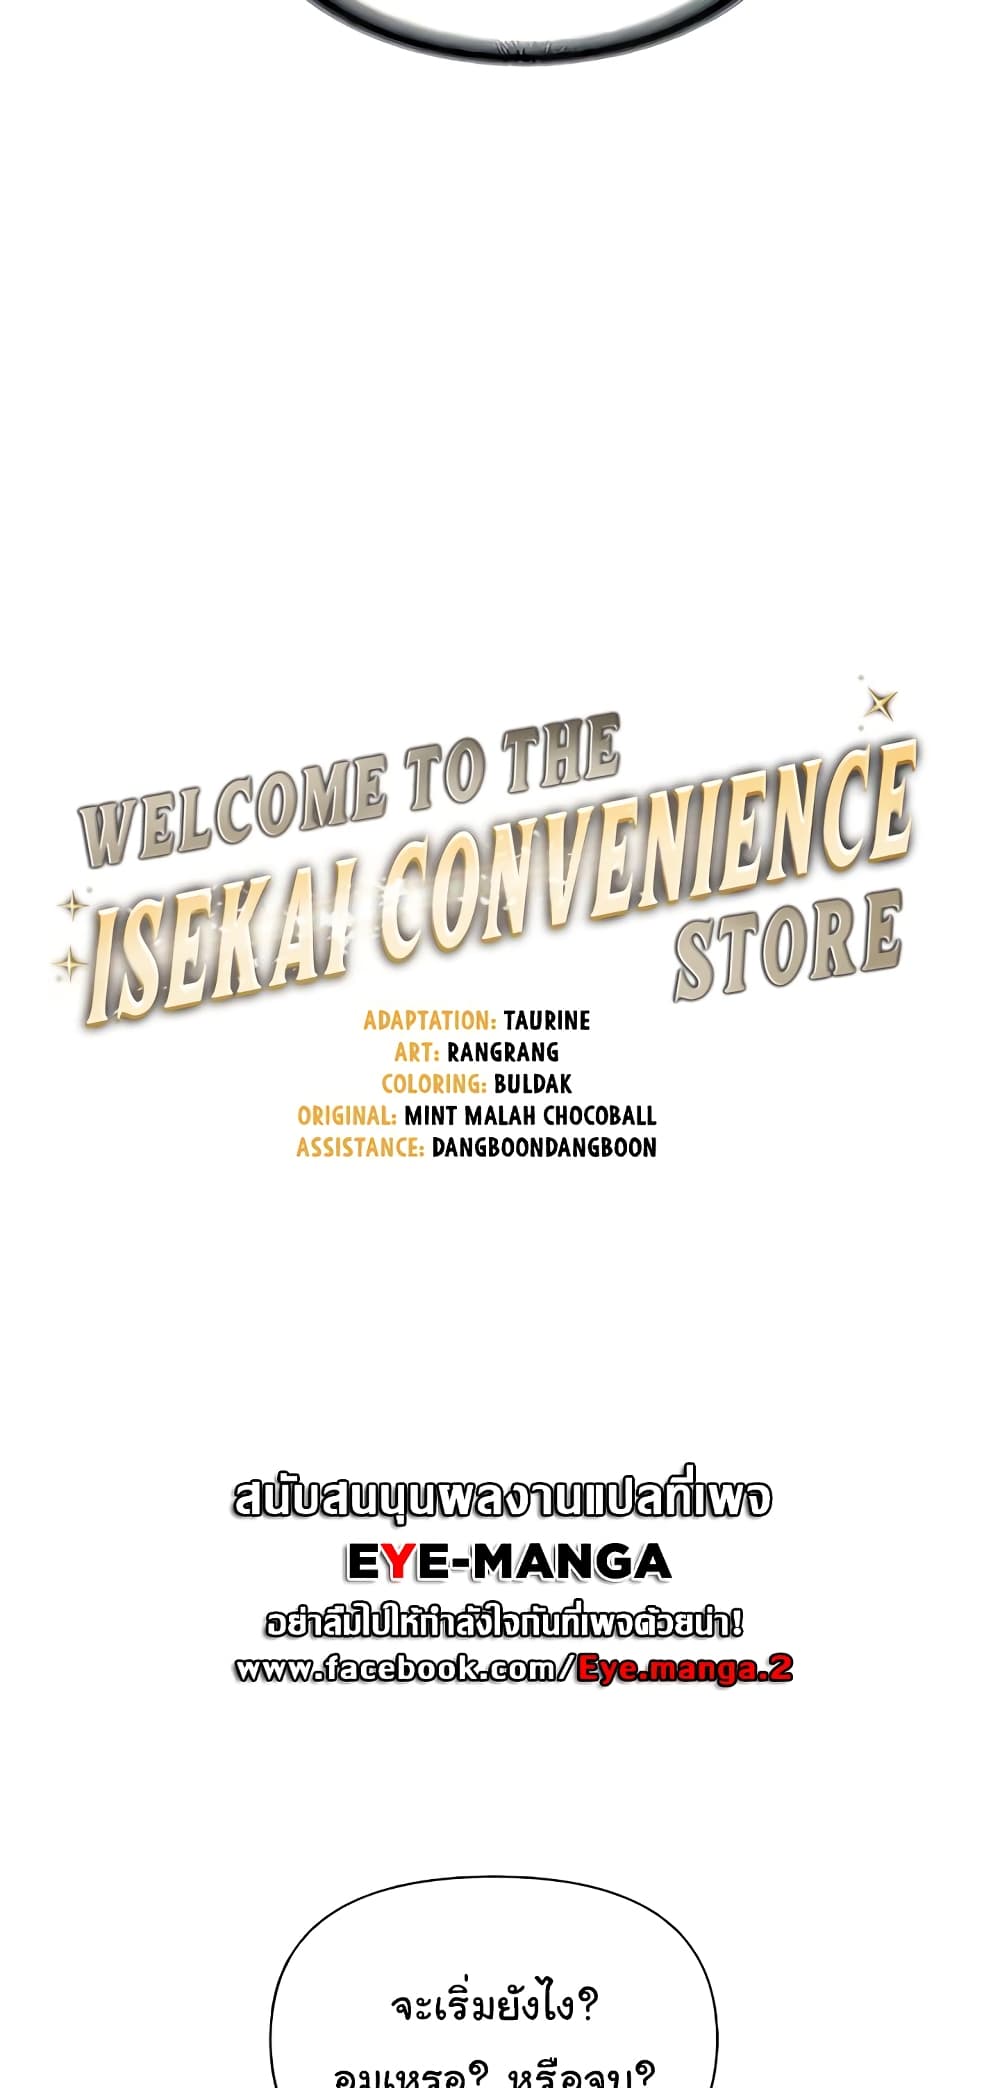 Welcome to the Isekai Convenience Store 9-9